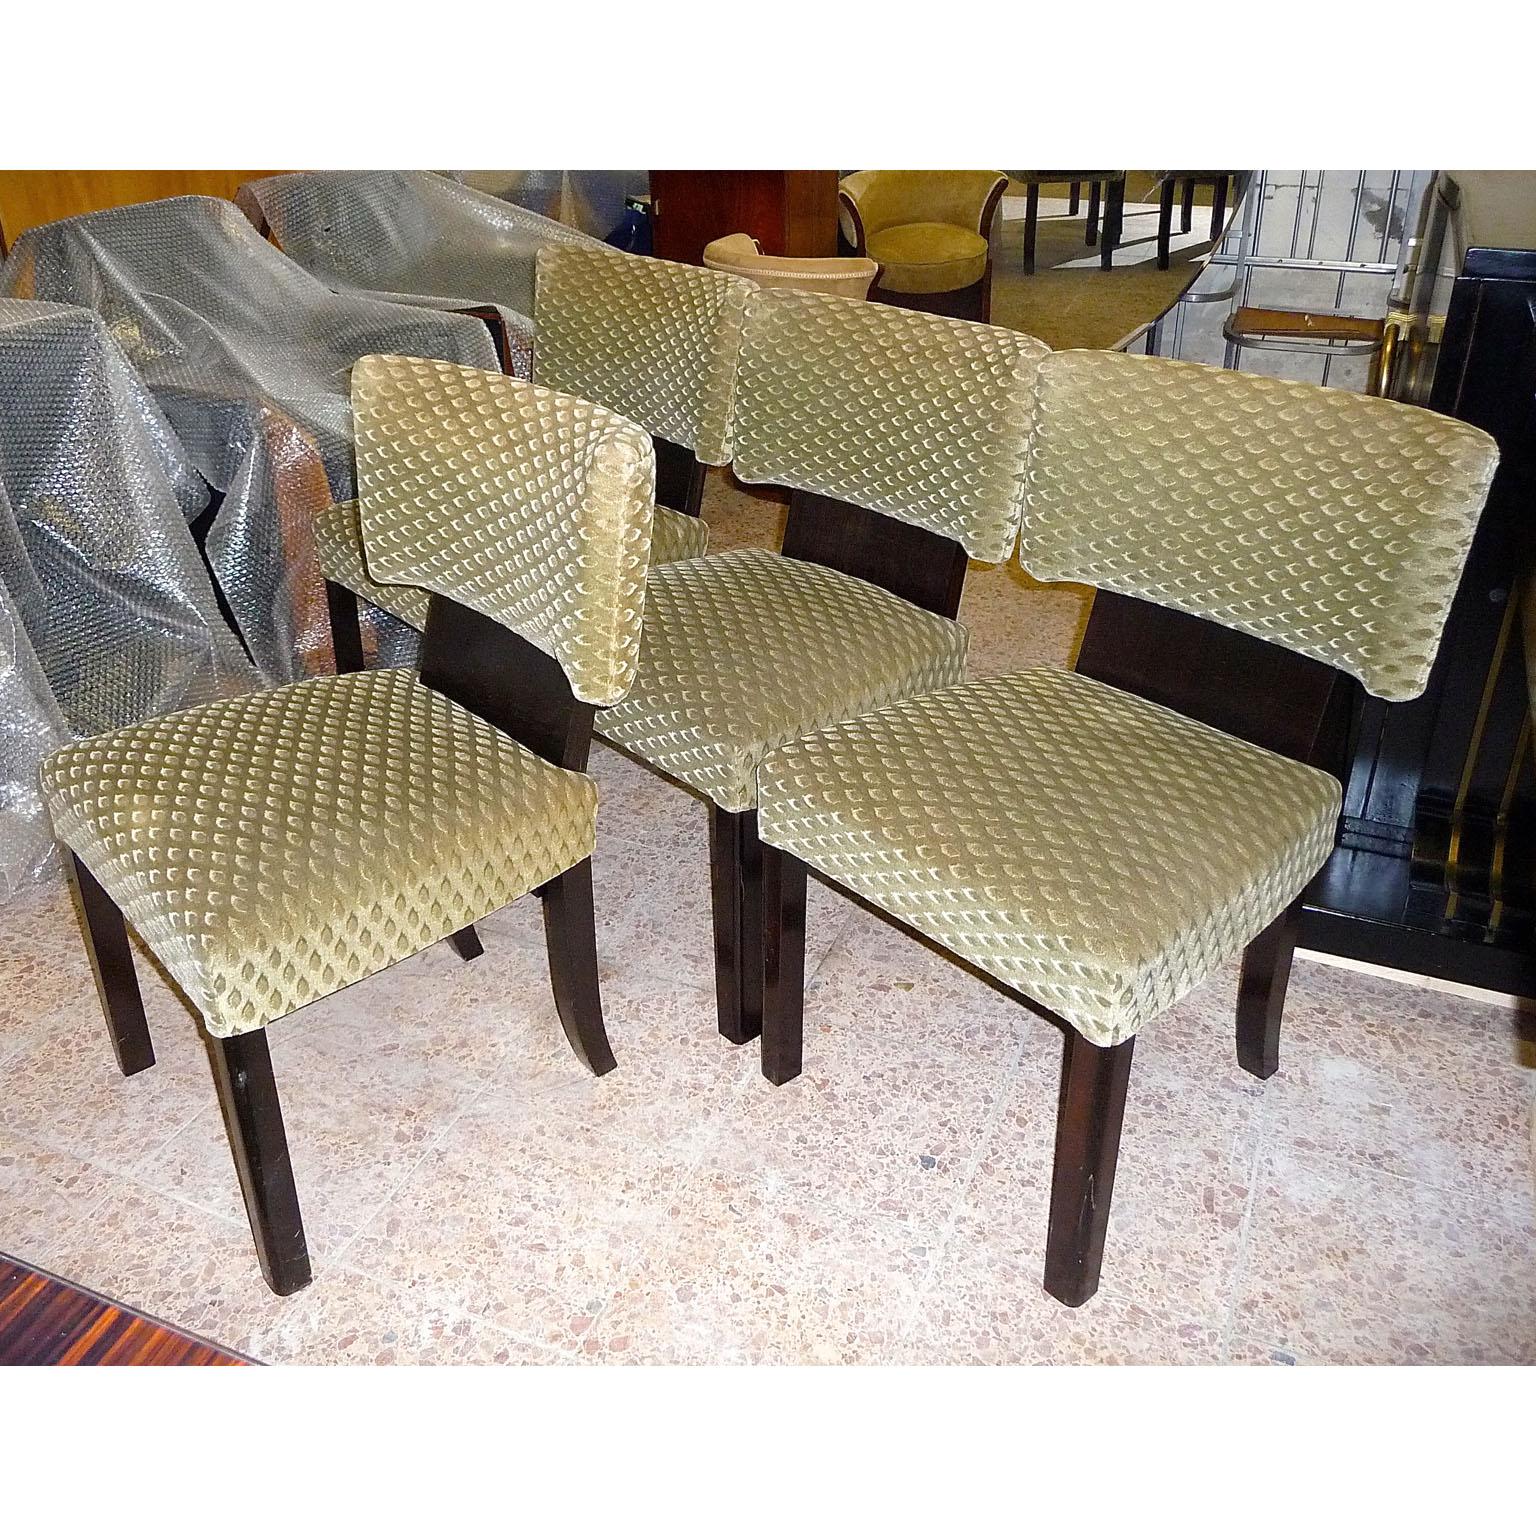 Upholstery Art Deco Bauhaus Dining Chairs, Set of Four, Bruno Paul Design, Germany, 1930s